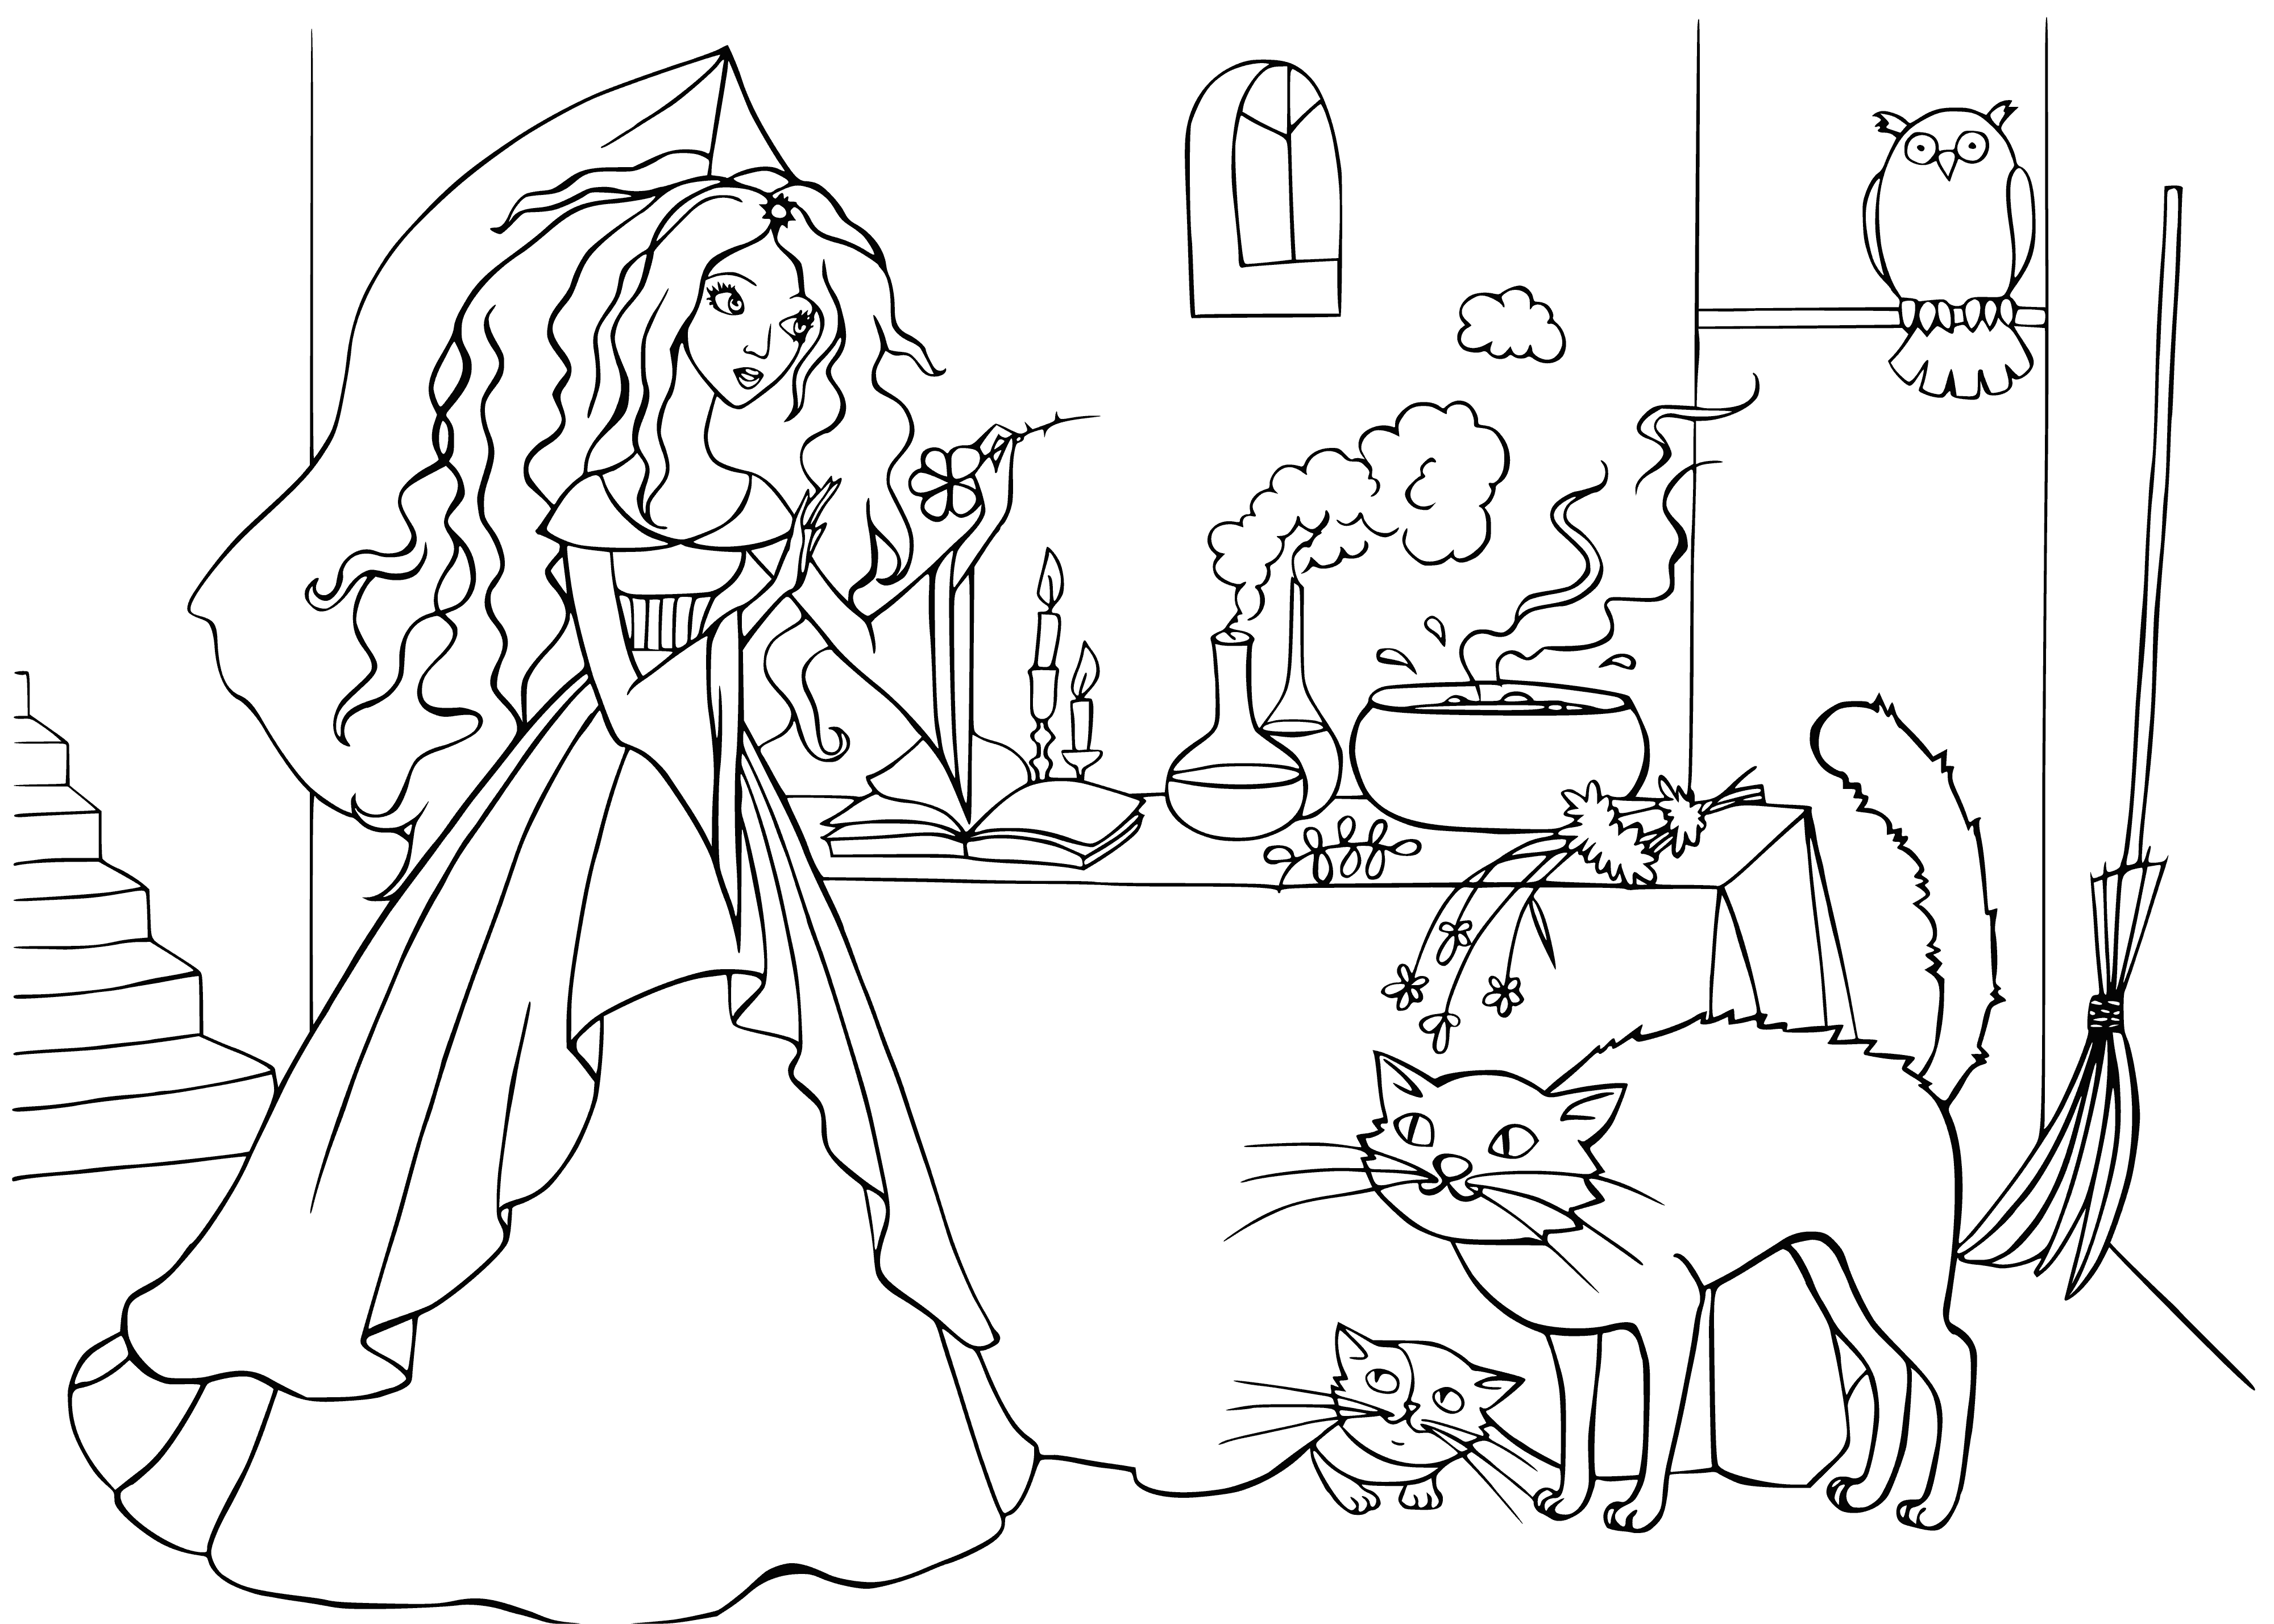 Witchcraft coloring page